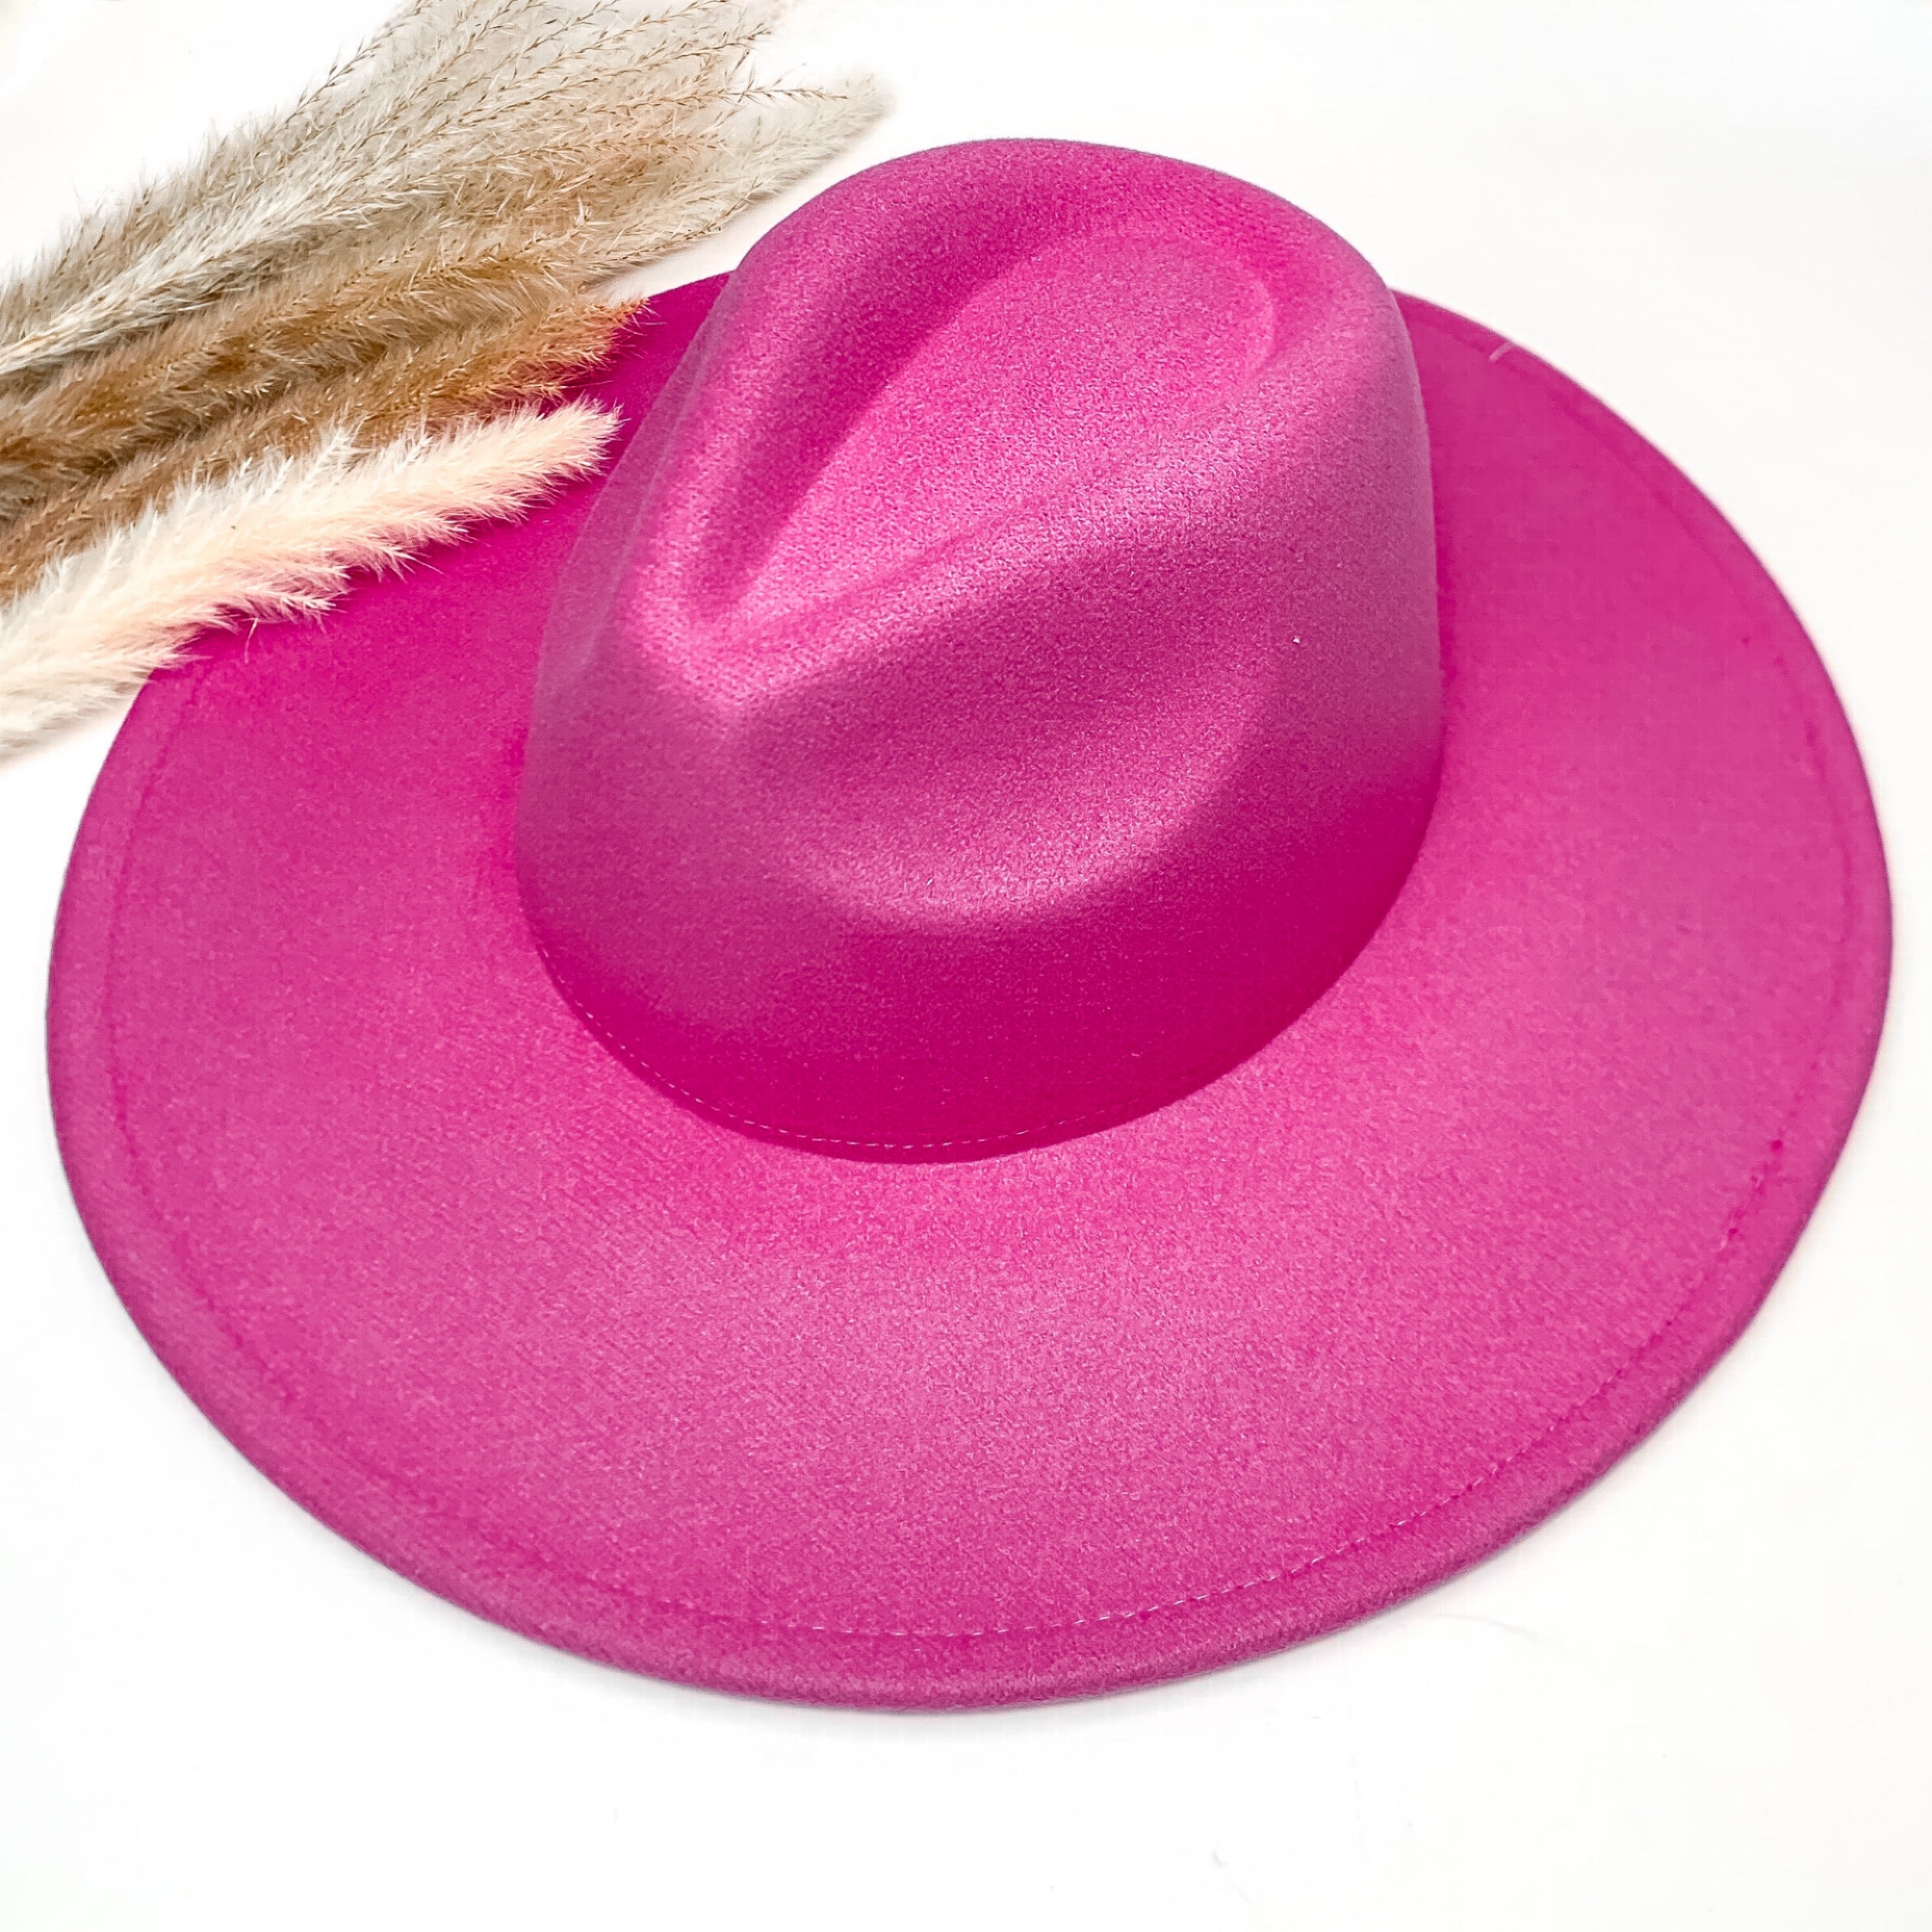 Plain and simple faux felt hat in hot pink color. This hat is sitting on a white background. There is brown and white feathers to the left of the hat.